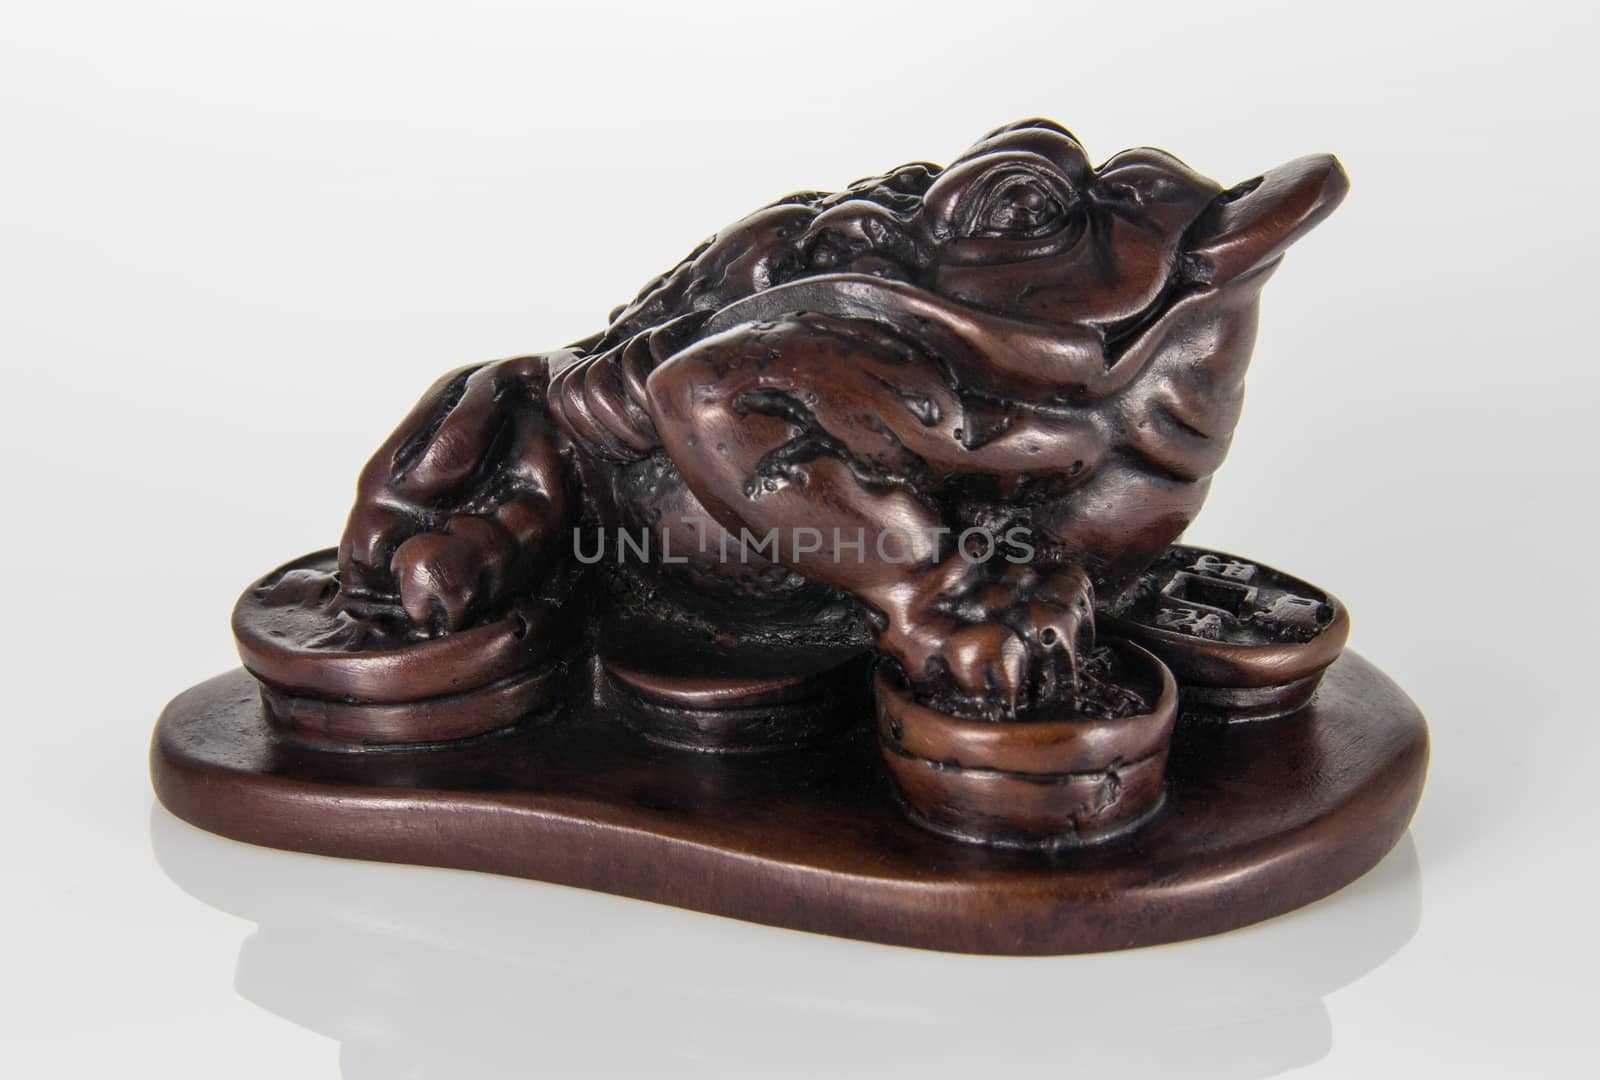 Three Legged Toad or Frog Feng Shui charm for prosperity